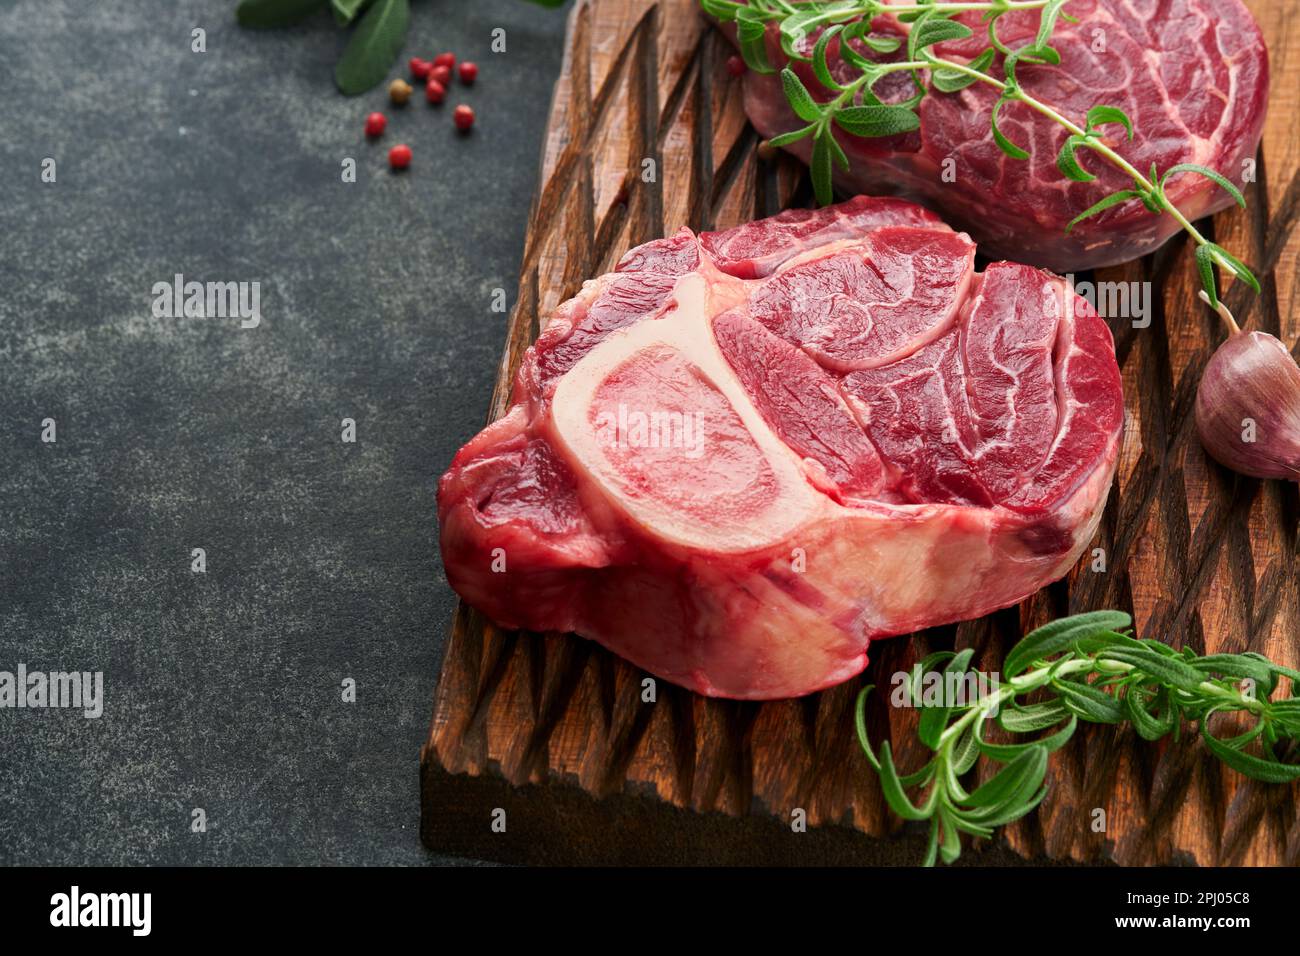 Osso Buco raw steak meat. Barbecue meat. Raw fresh cross cut veal shank and seasonings pepper, rosemary, thyme and salt on old wooden rustic backgroun Stock Photo